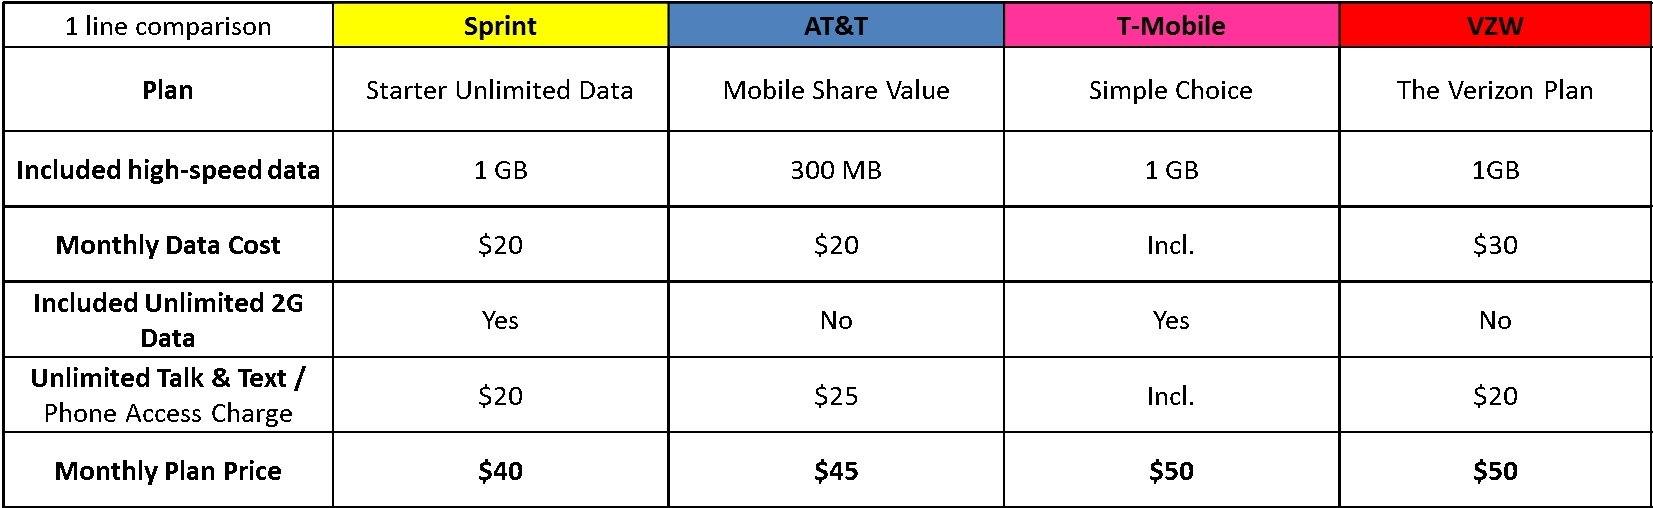 Sprint's new Starter Unlimited Data Plan debuts tomorrow - $20 a month buys you unlimited data from Sprint (with just 1GB of 4G LTE service)